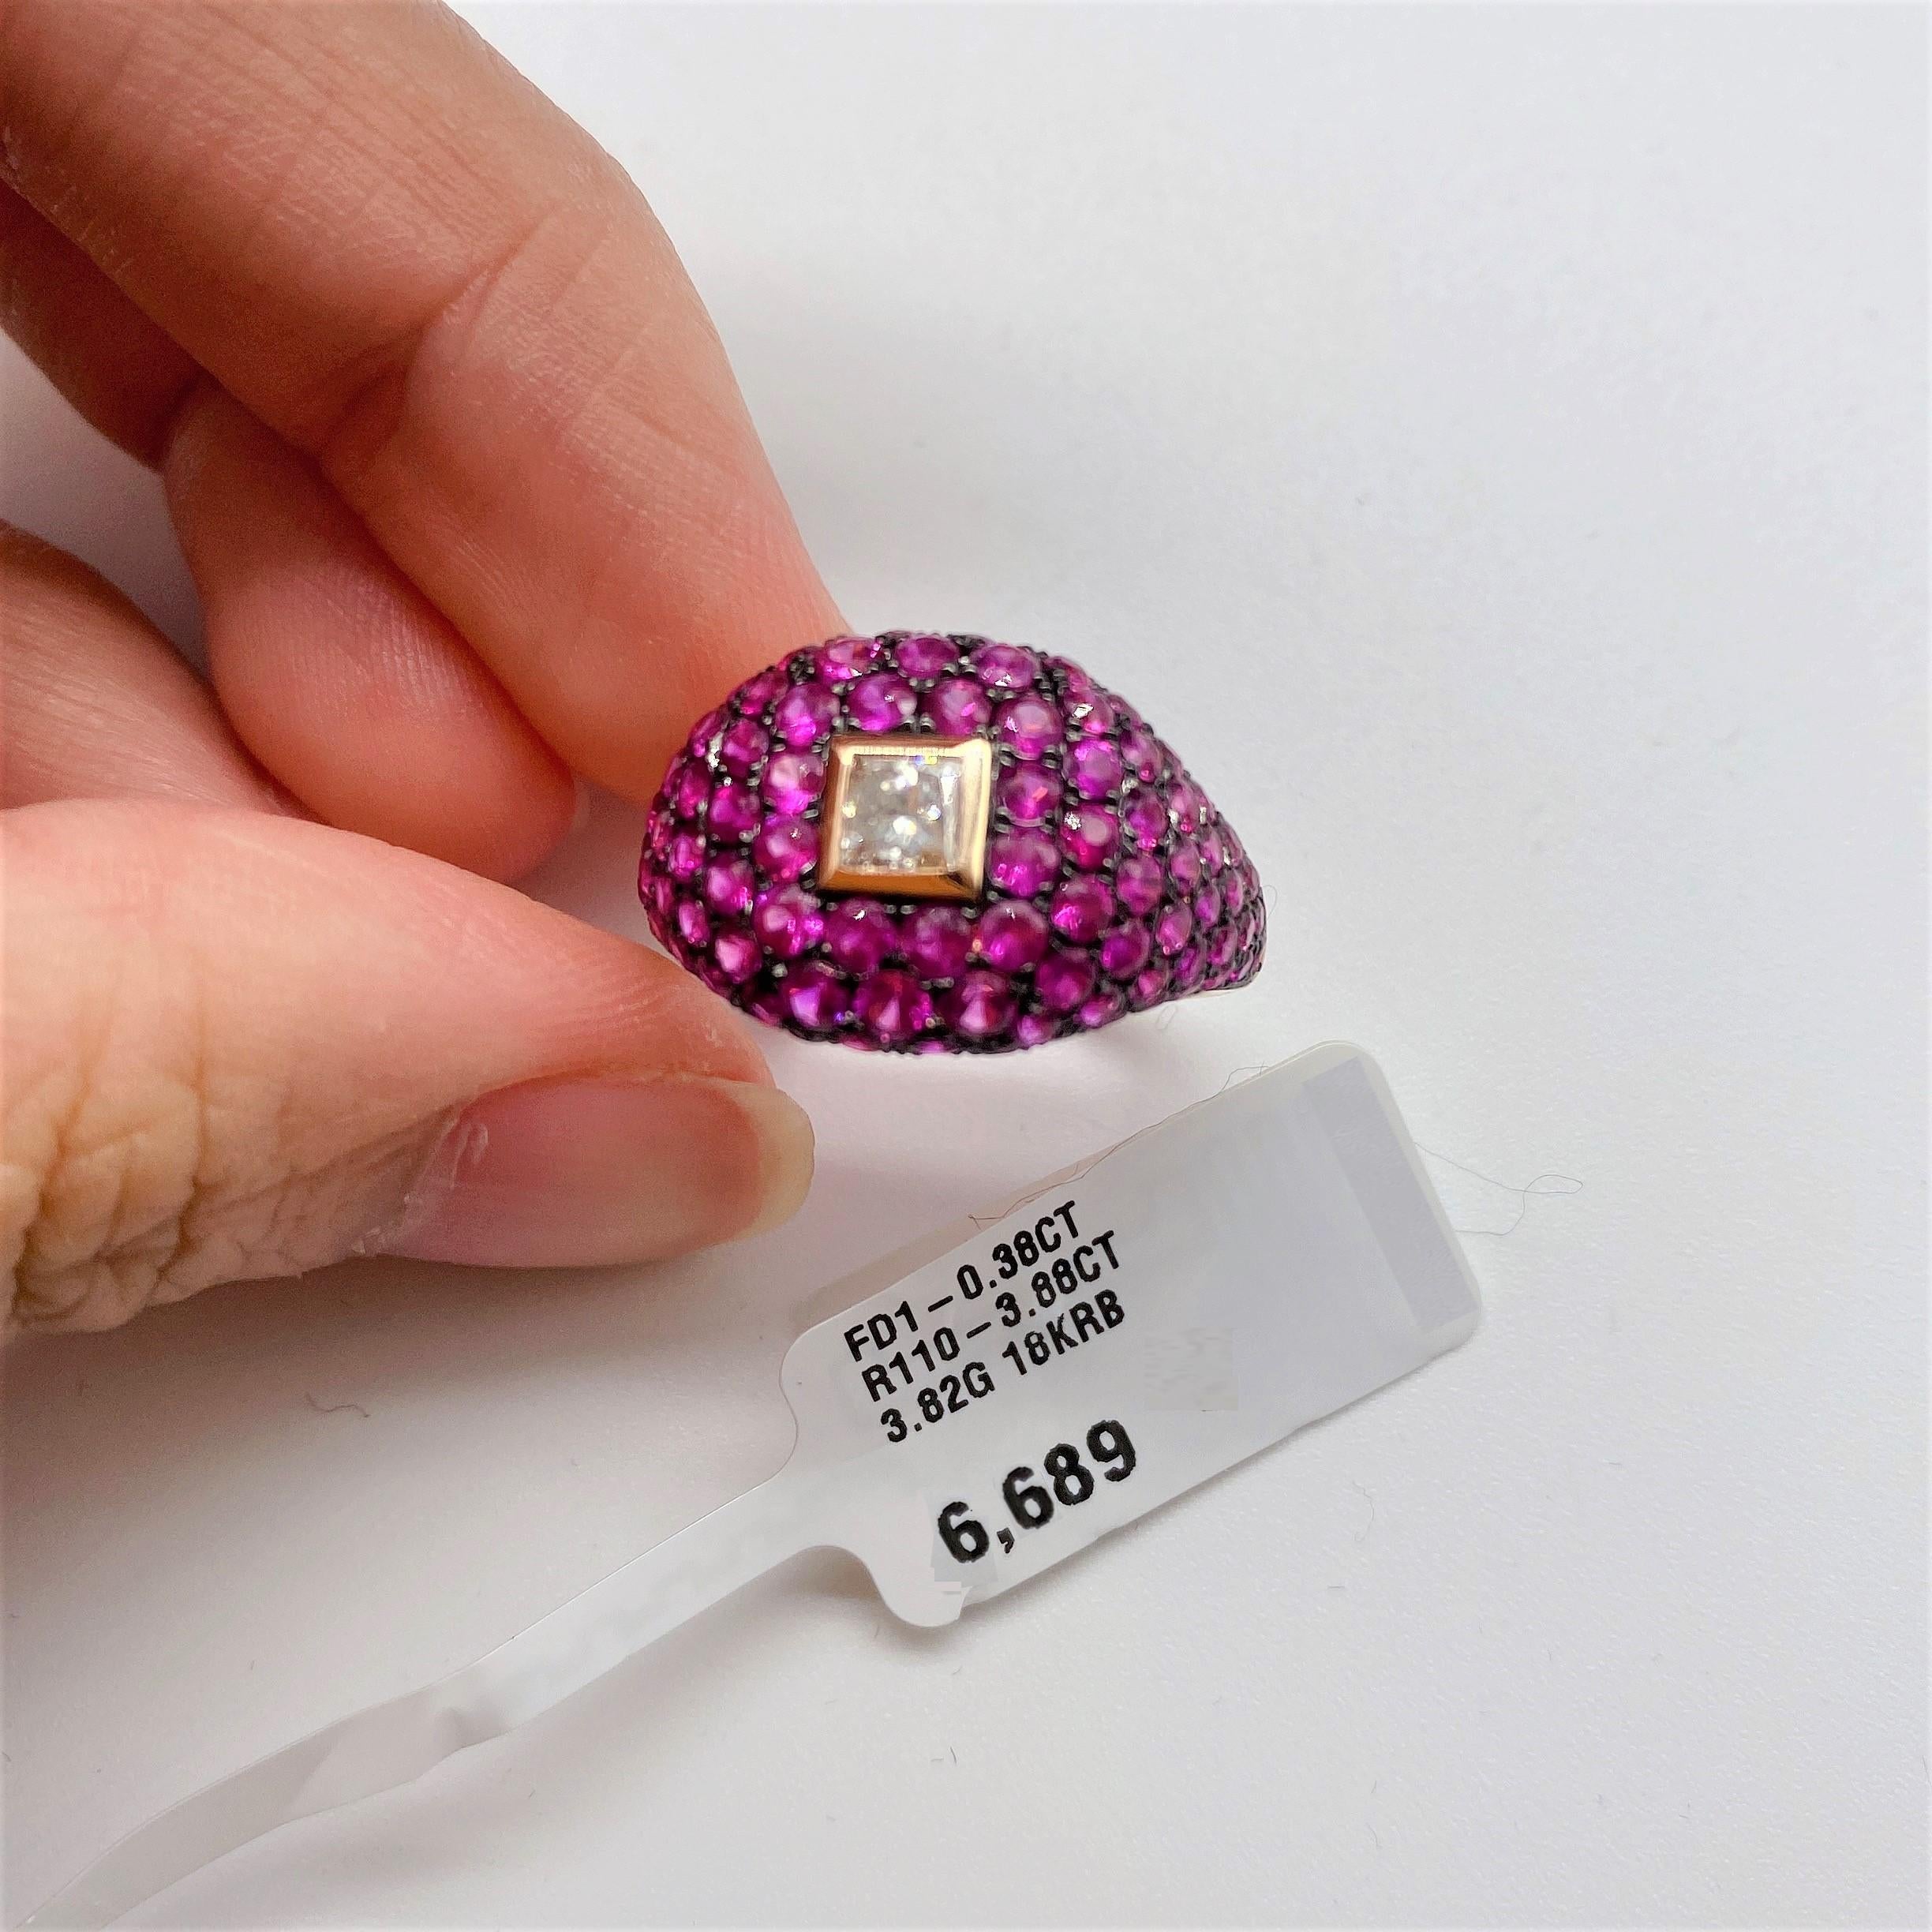 NWT $6, 689 Rare 18KT Fancy Glittering Ruby Princess Cut Diamond Ring In New Condition For Sale In New York, NY